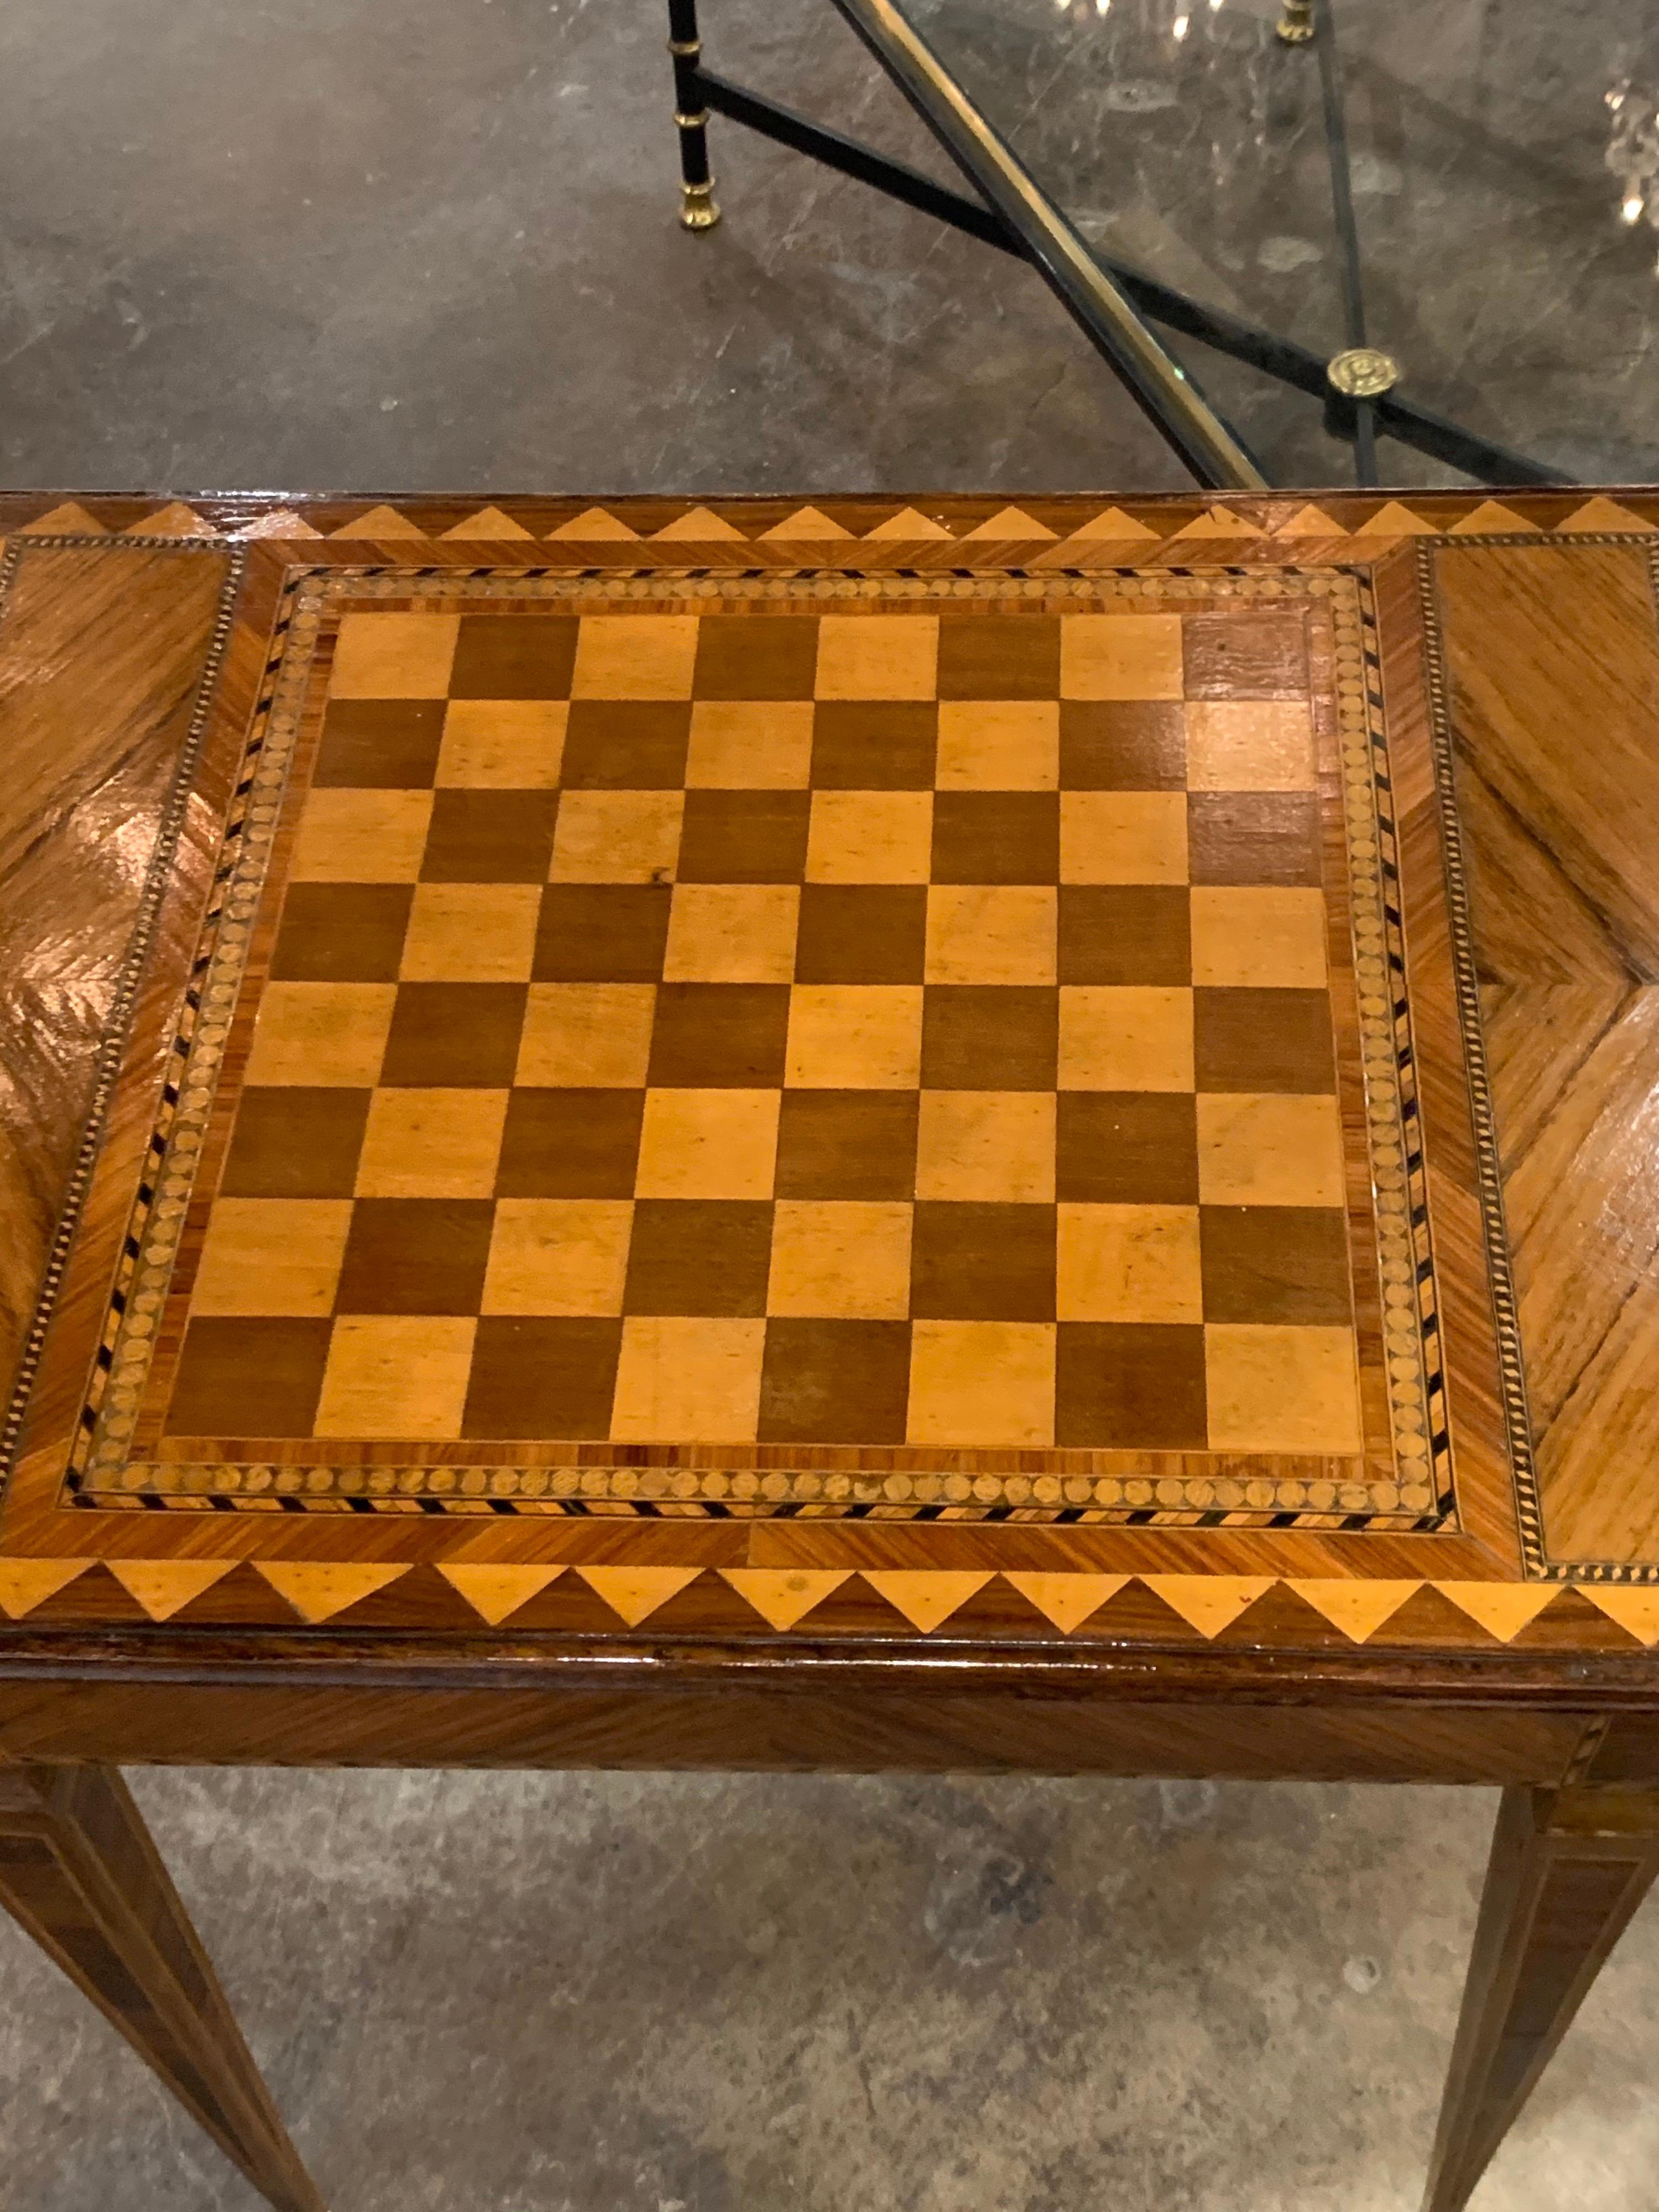 Decorative 19th century check board top side table made of kingwood, maple and mahogany. Beautiful inlaid pattern as well!